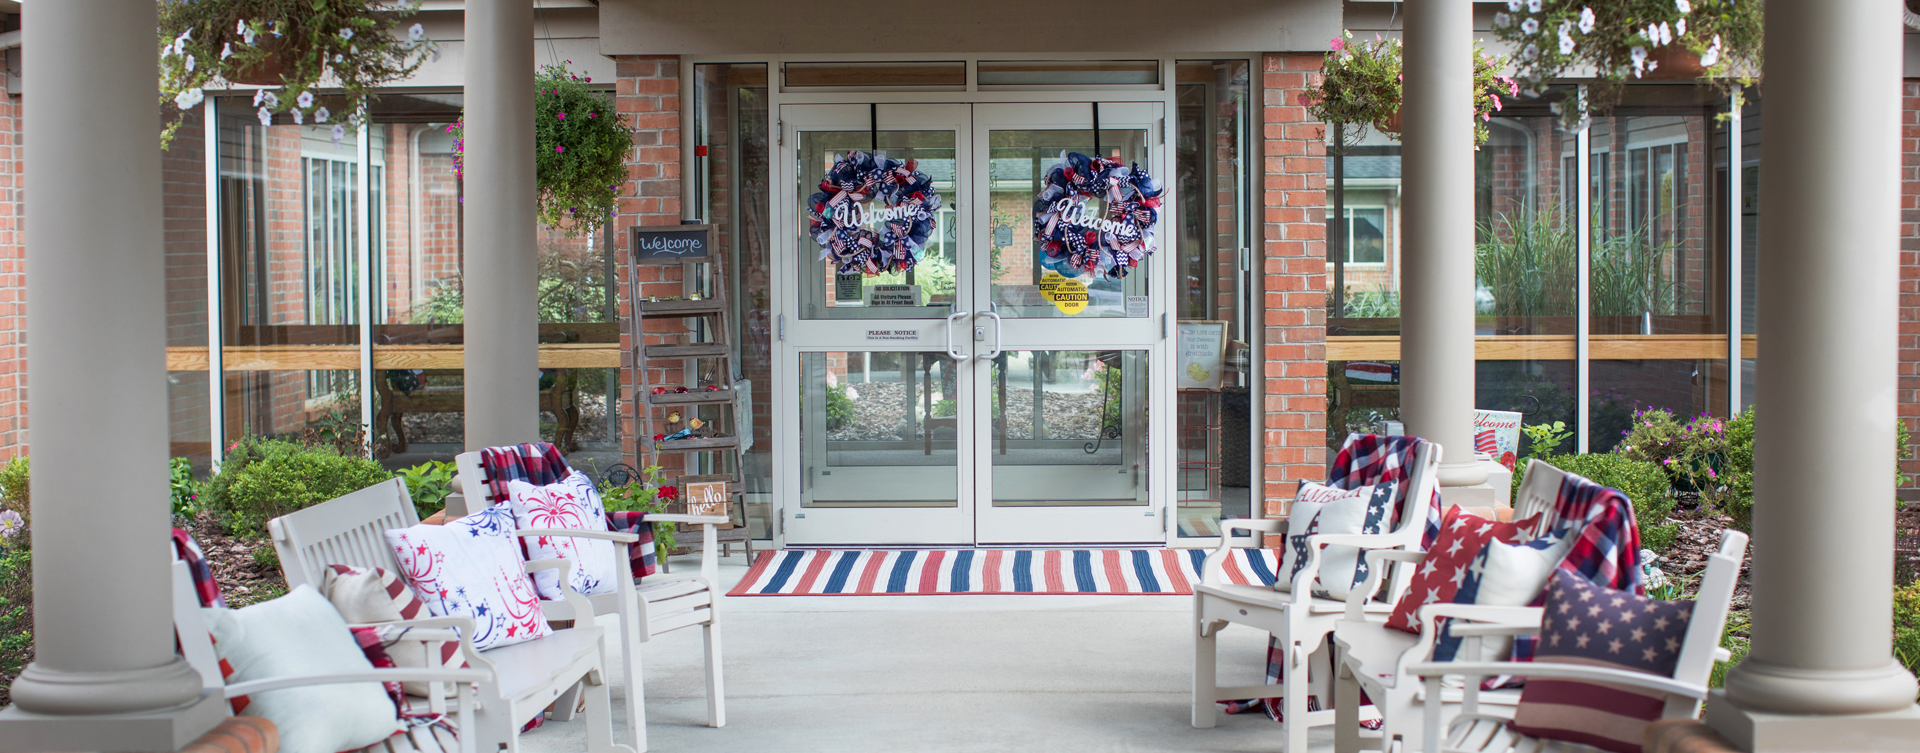 Sip on your favorite drink on the porch at Bickford of Lancaster